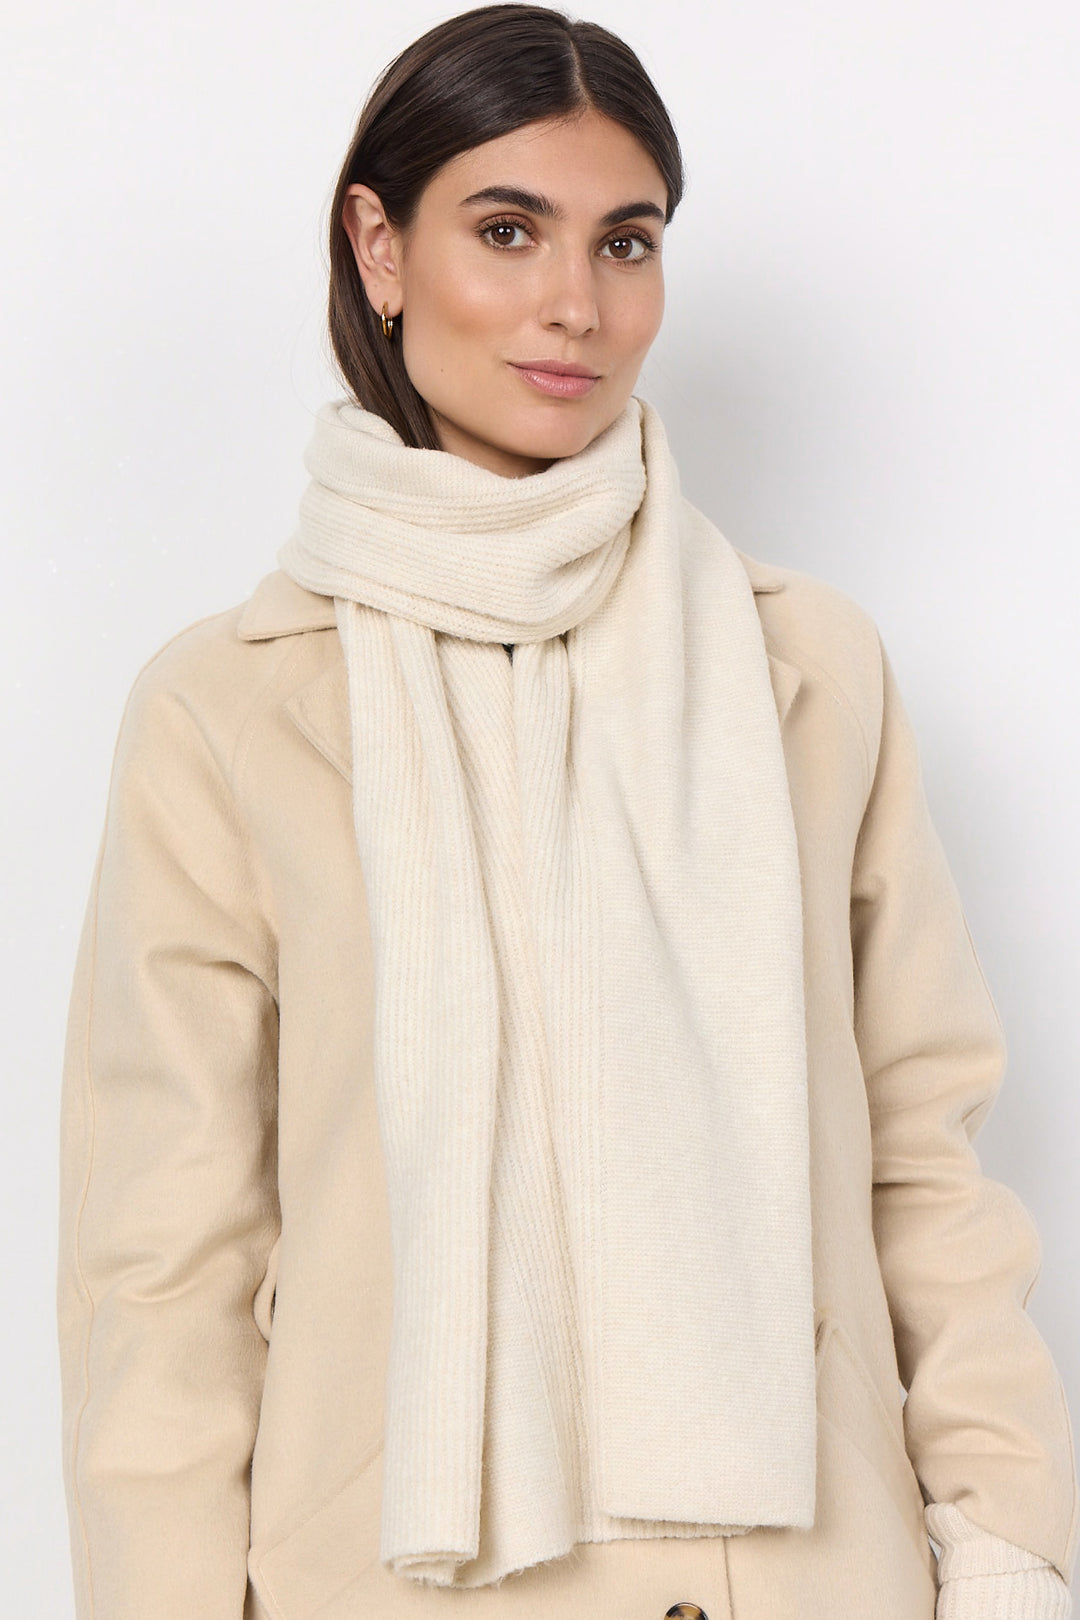 This rectangular scarf features classic fall colours of black & cream to perfectly complement your look. The unique ribknitted pattern design adds a modern and elegant touch to any ensemble. 